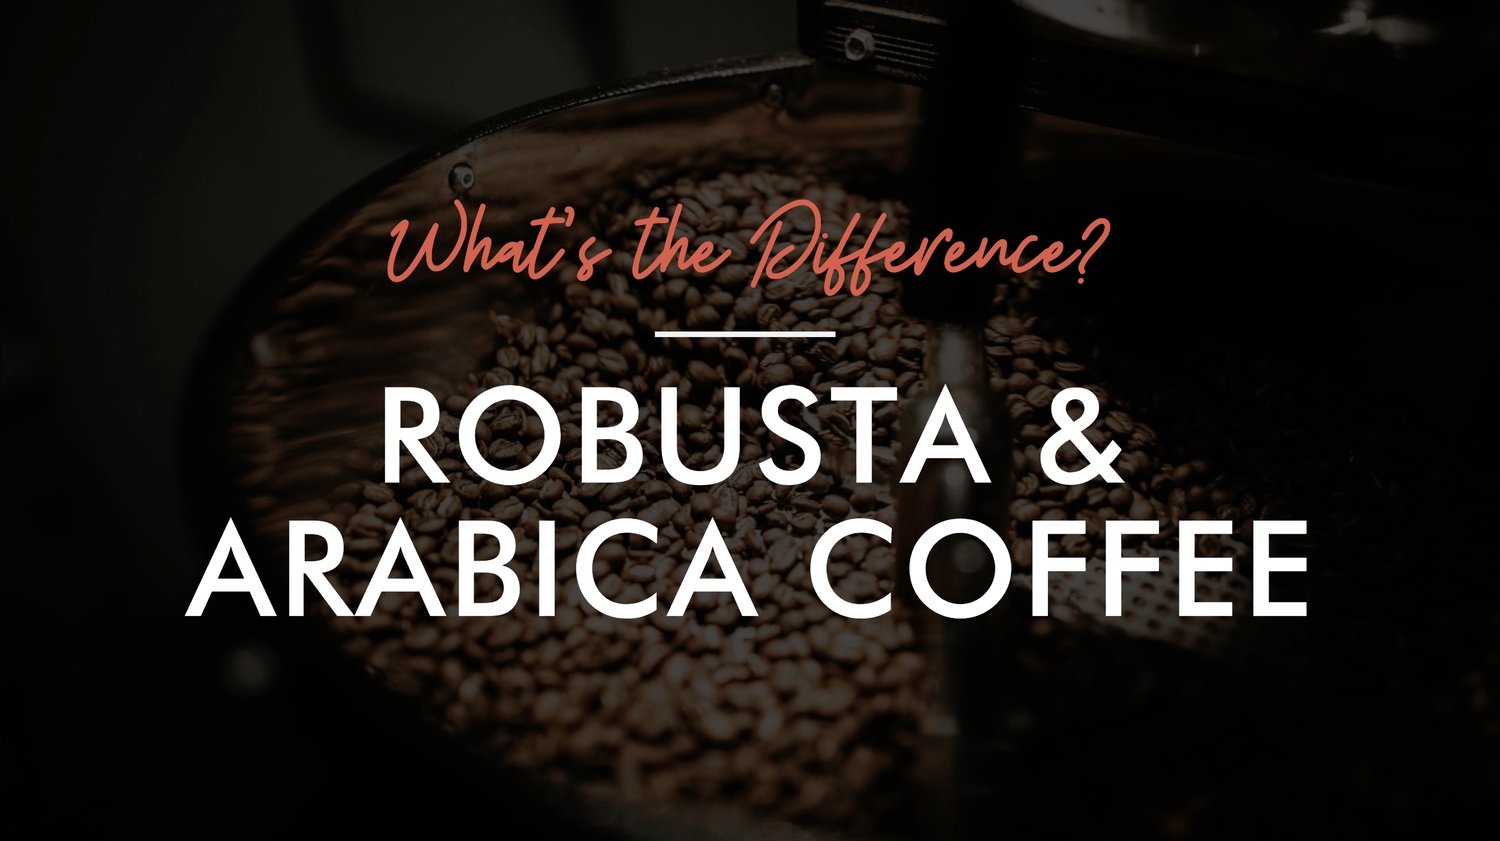 What's The Difference Between Robusta & Arabica Coffee?